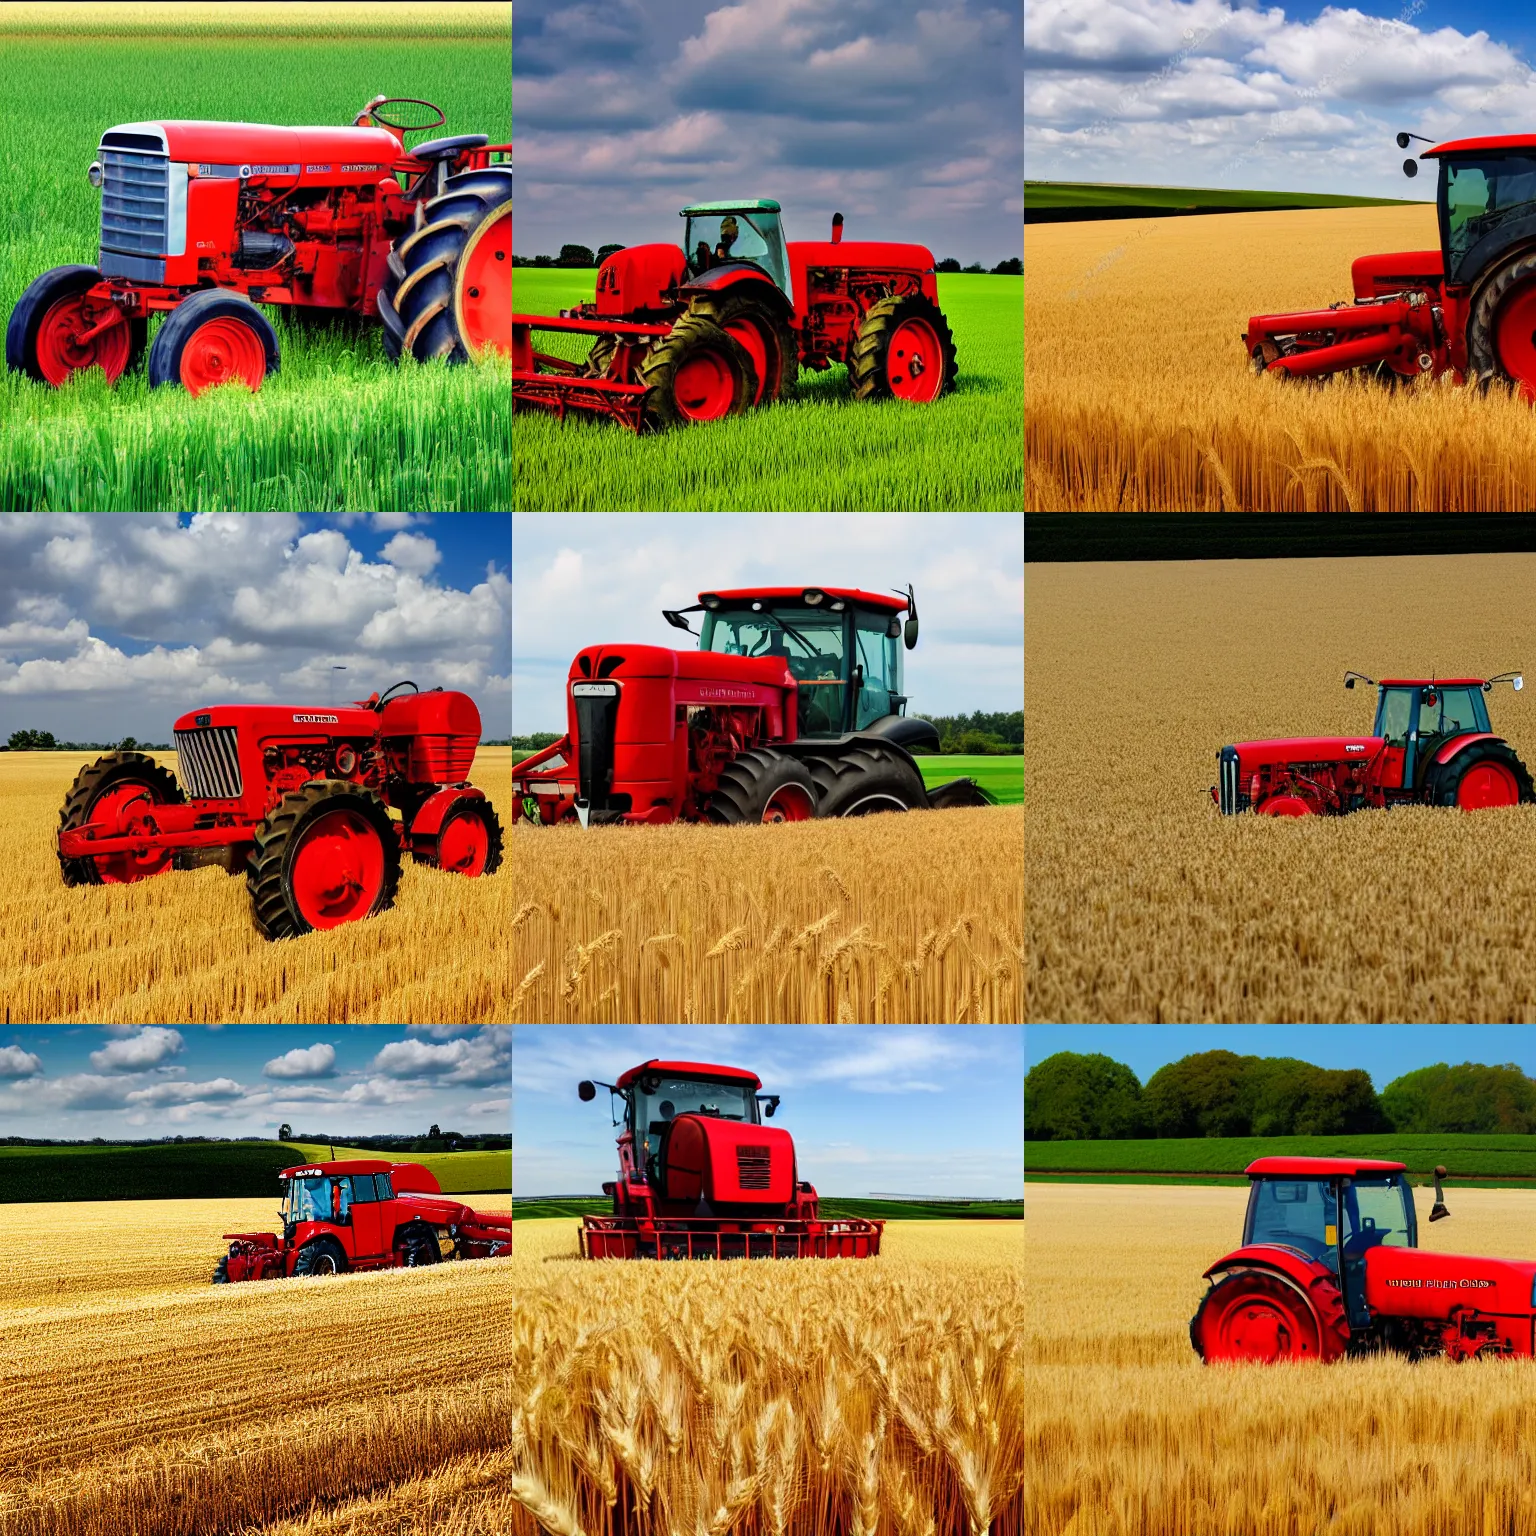 Prompt: A red tractor, wheat field.